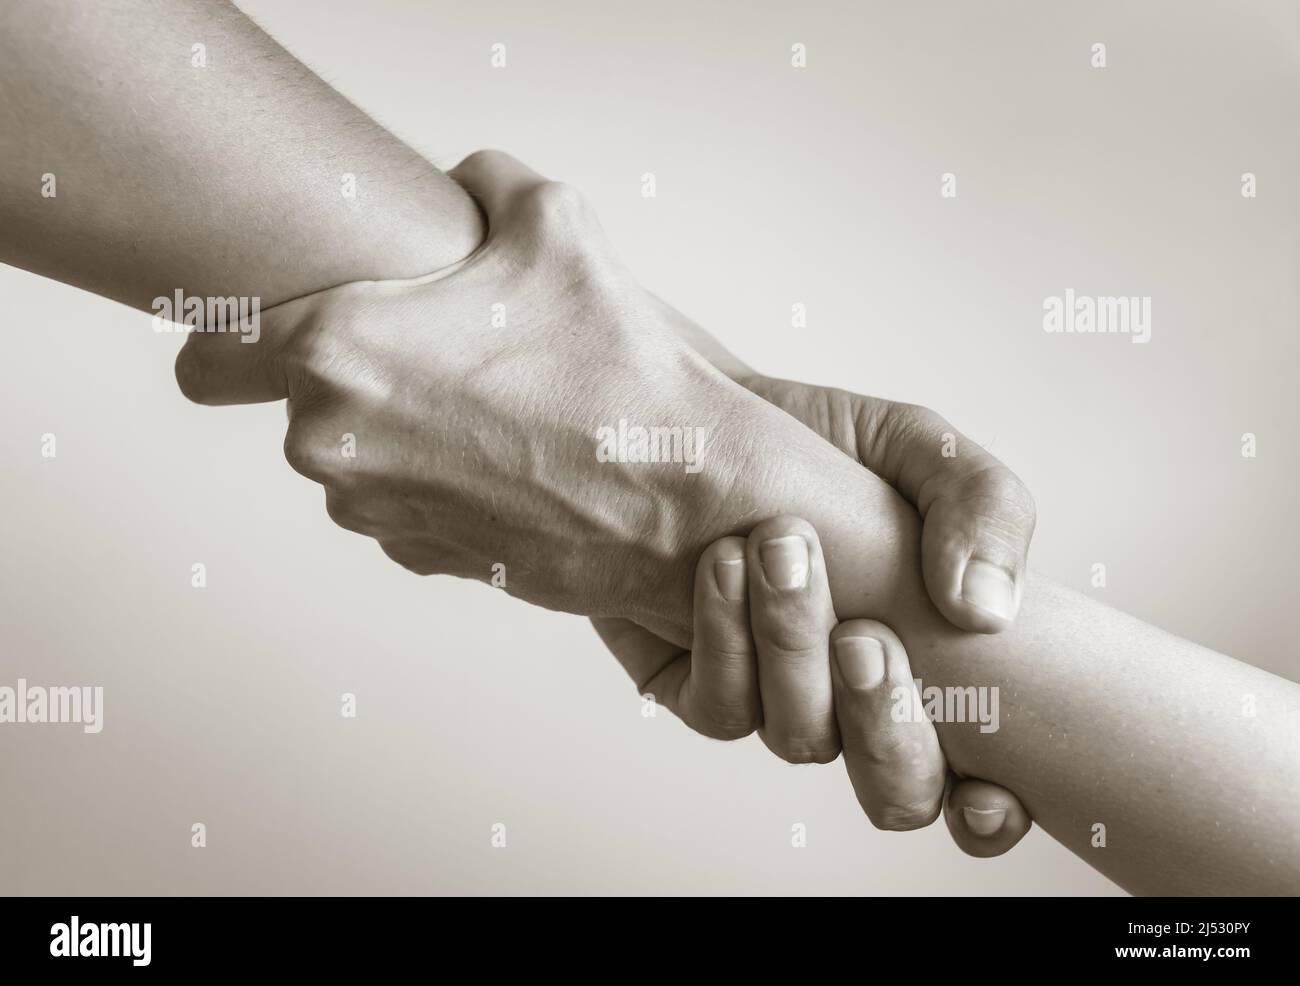 Giving a helping hand, support and assistance concept Stock Photo